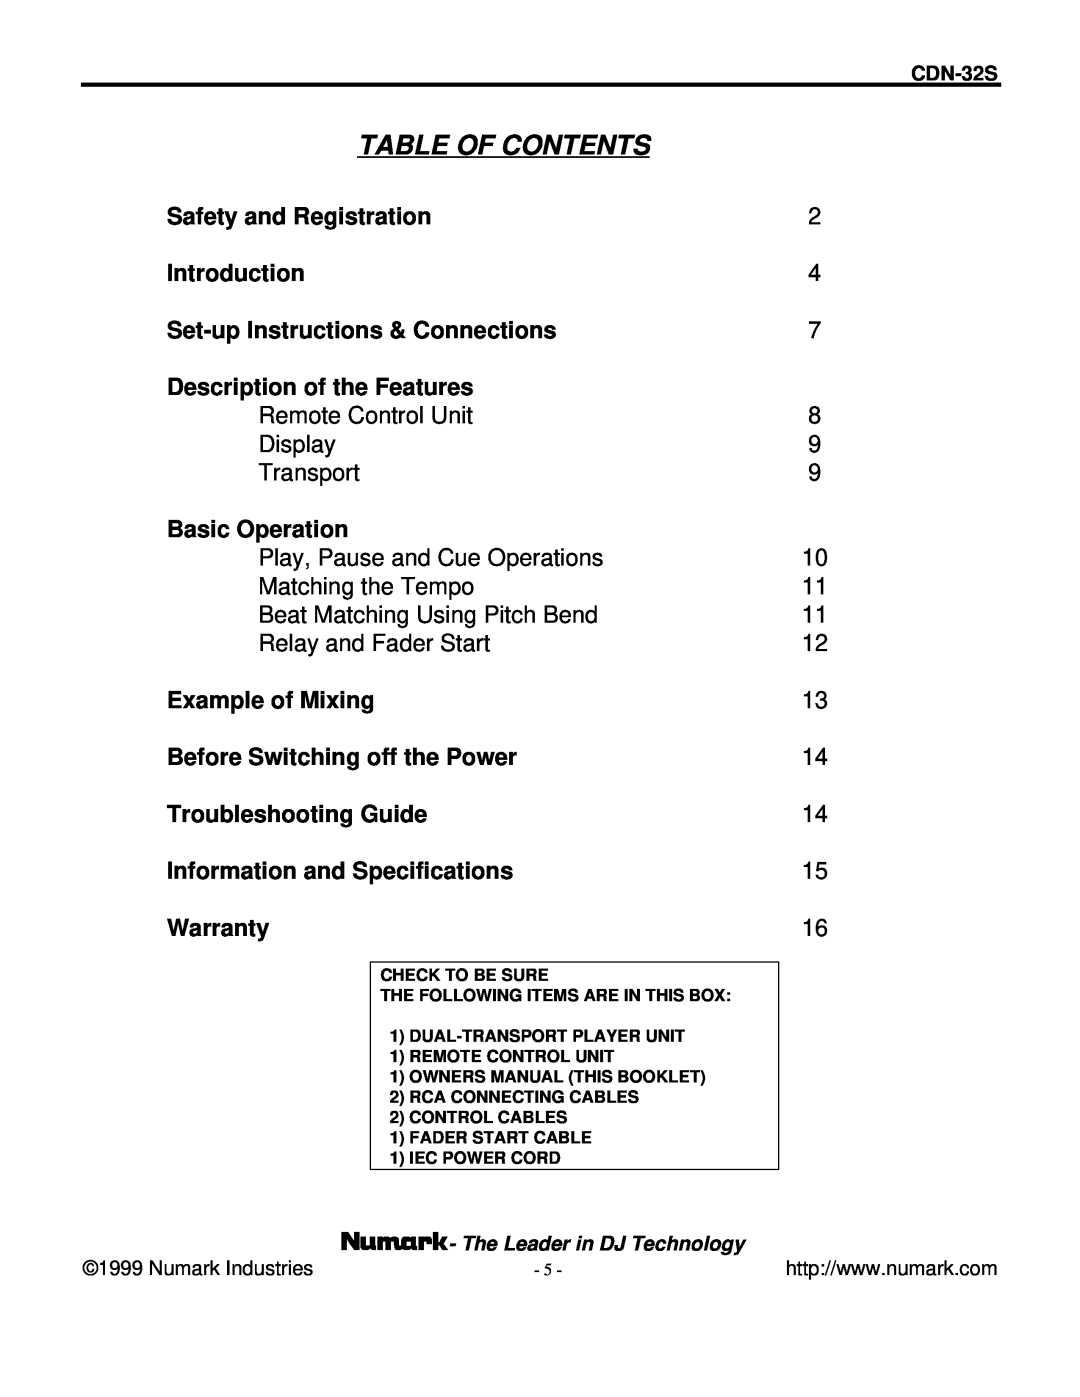 Numark Industries CDN-32S manual Table Of Contents 